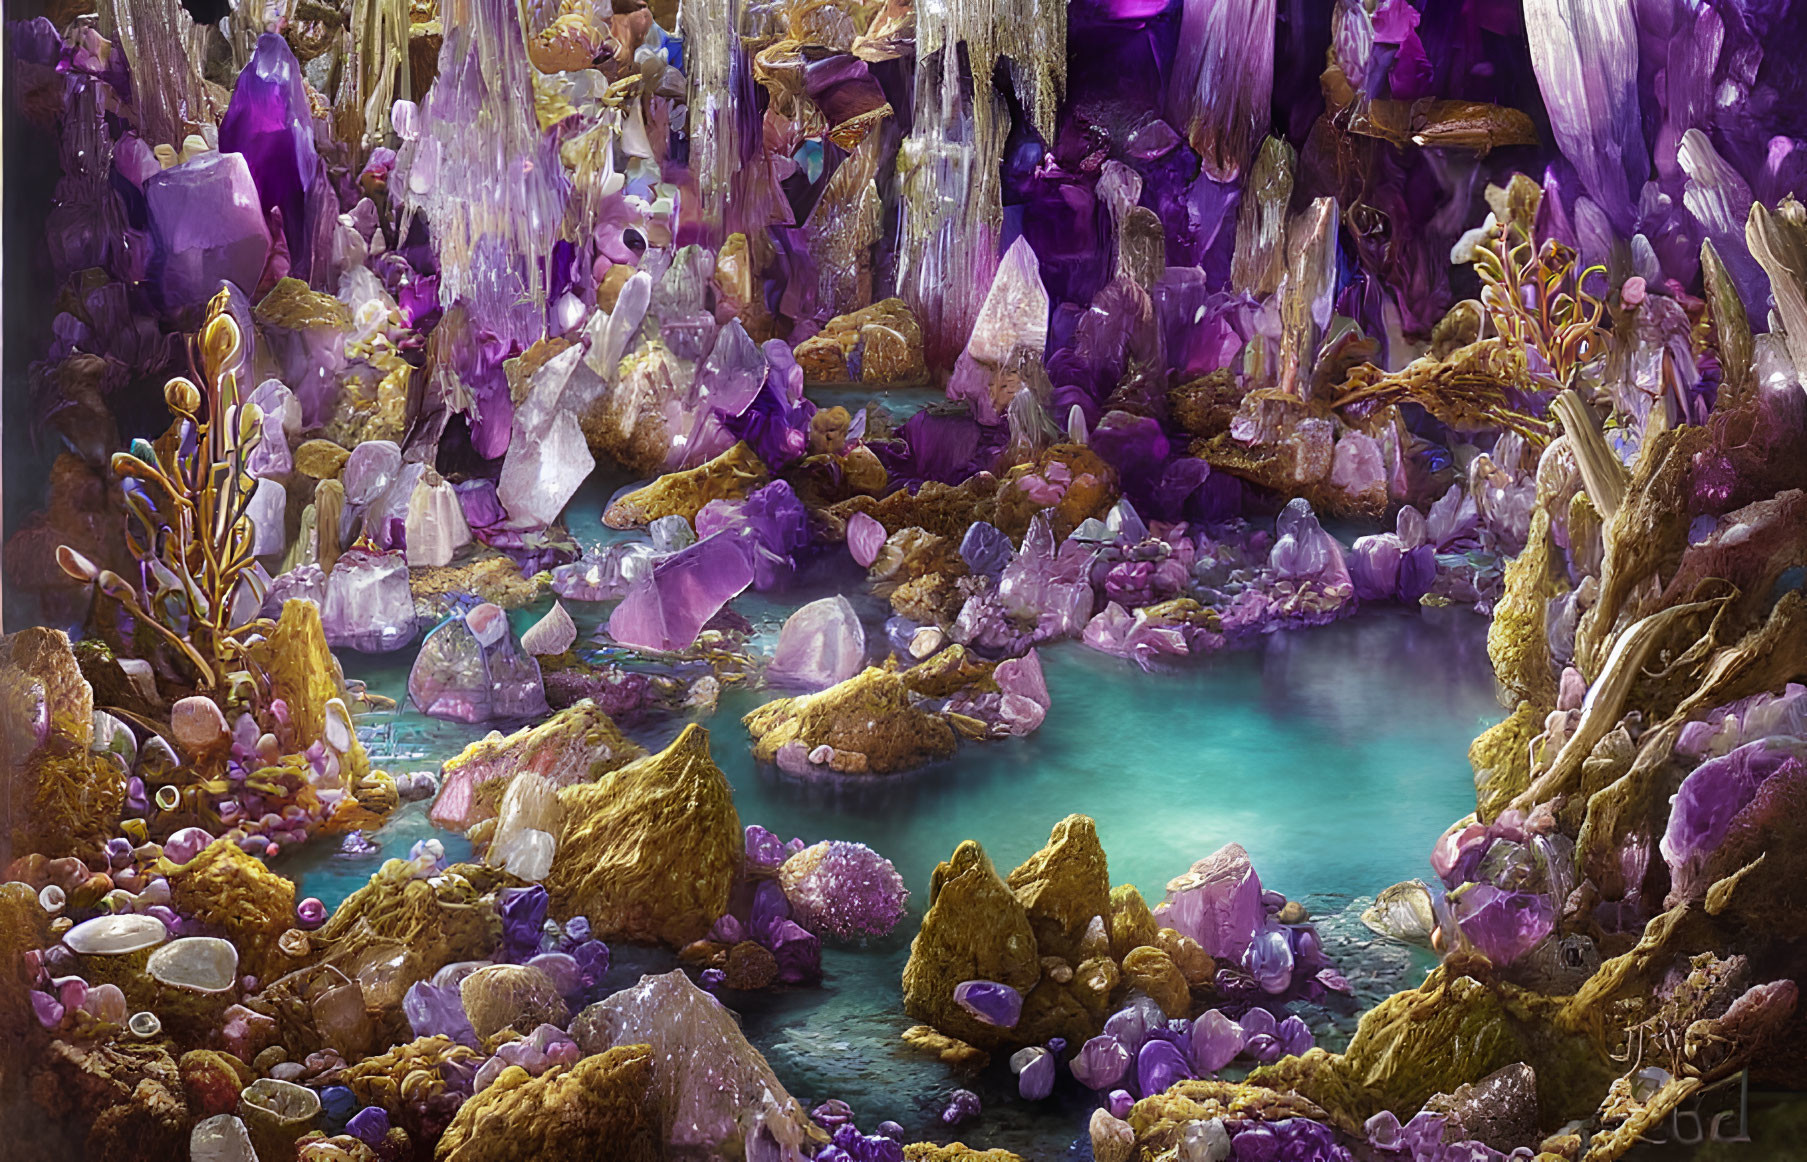 Vibrant amethyst crystal cave with teal water pool & colorful minerals